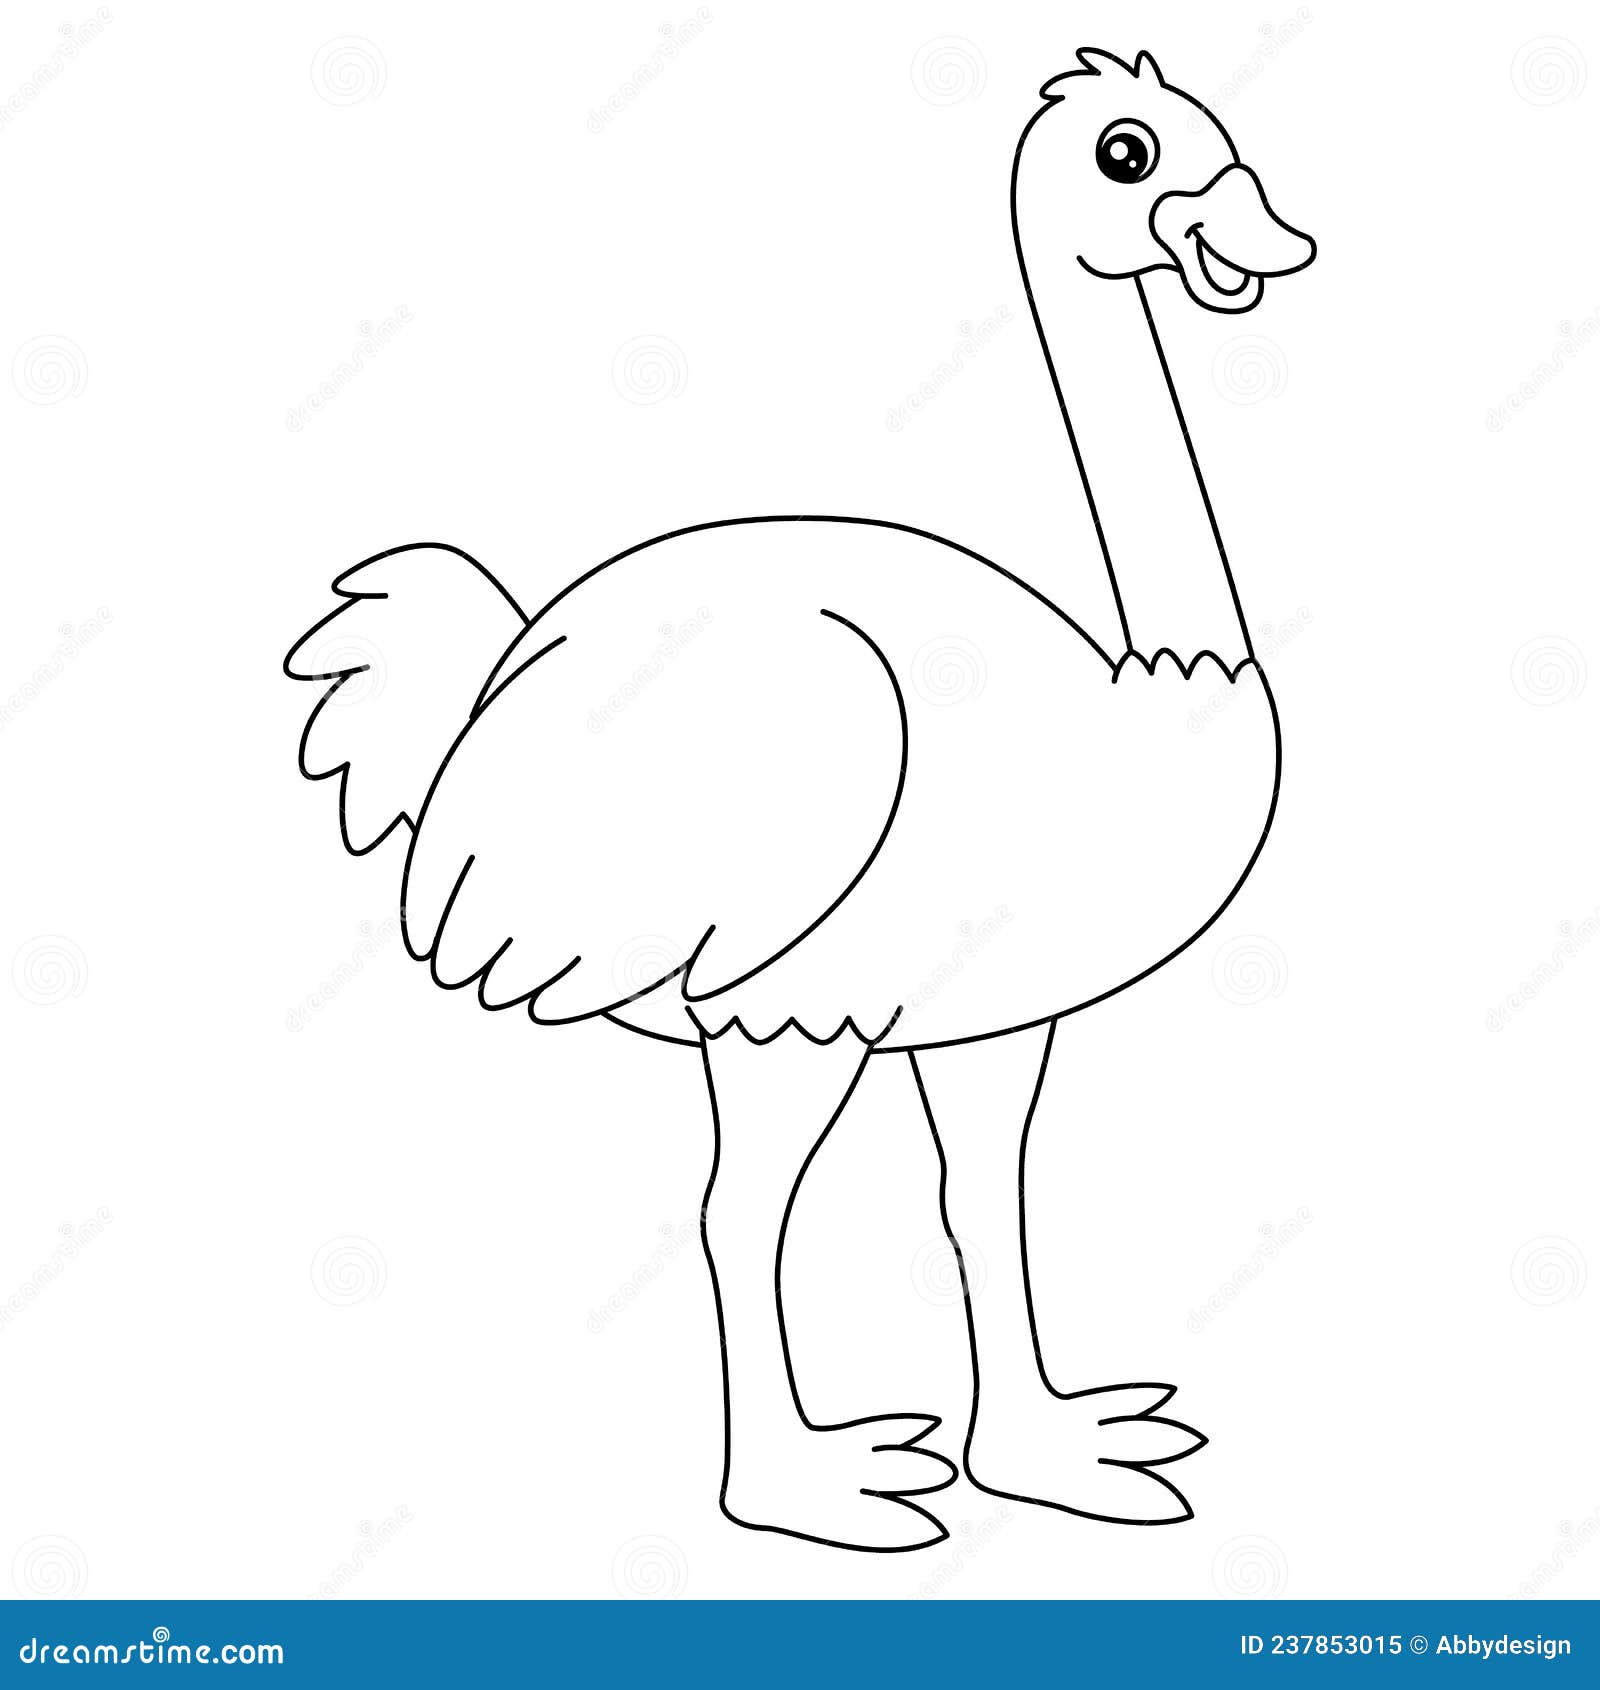 Ostrich coloring page isolated for kids stock vector